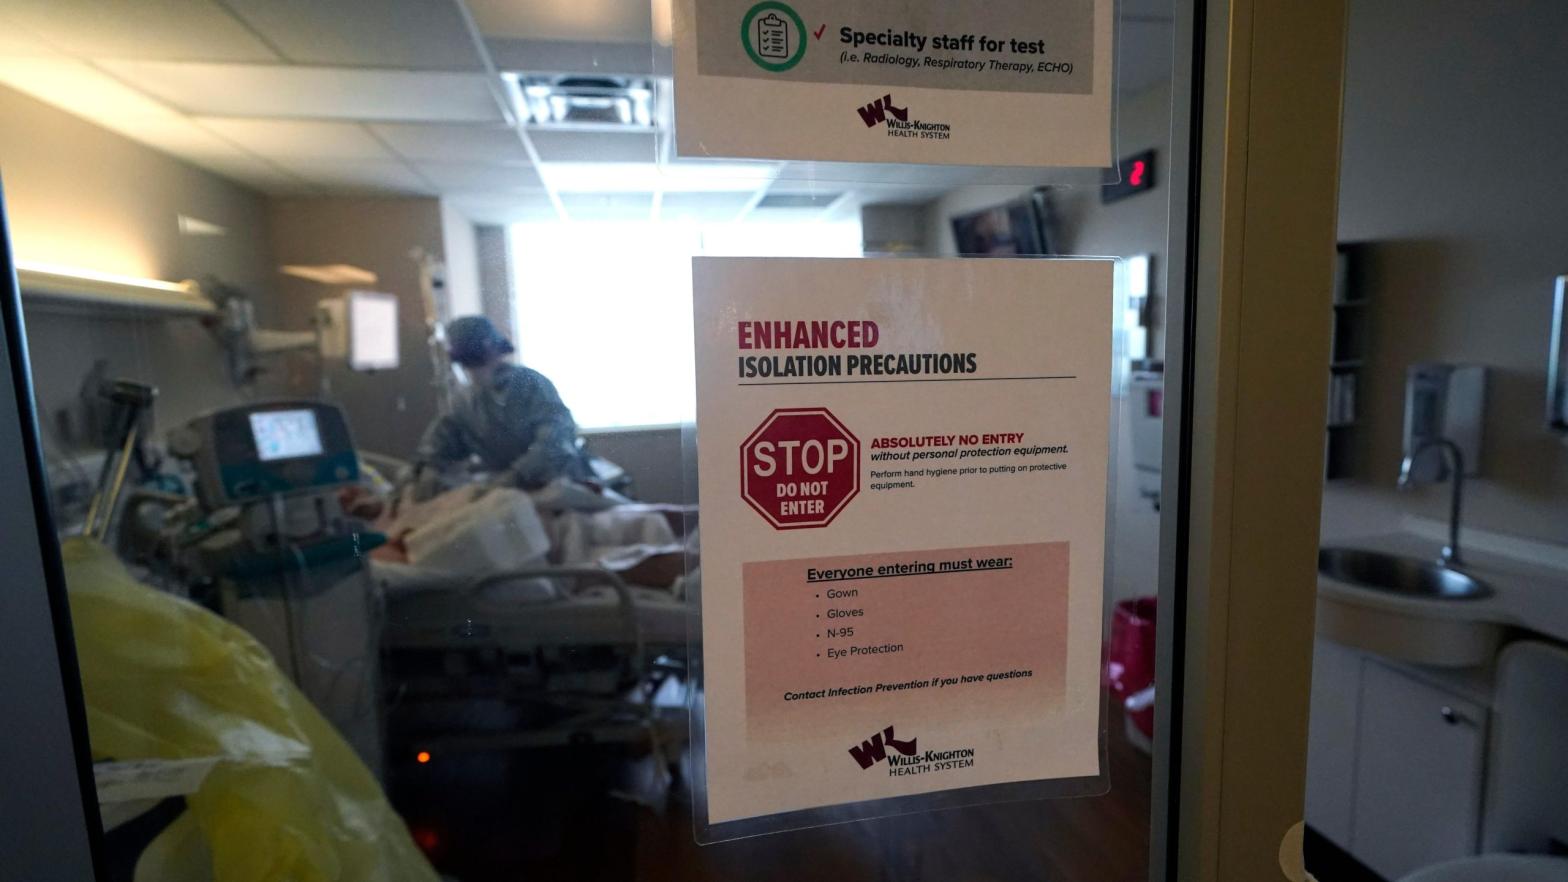 Isolation precautions are posted on a door of a patient suffering from covid-19, in an intensive care unit at the Willis Knighton Medical Centre in Shreveport, Louisiana. (Photo: Gerald Herbert, AP)